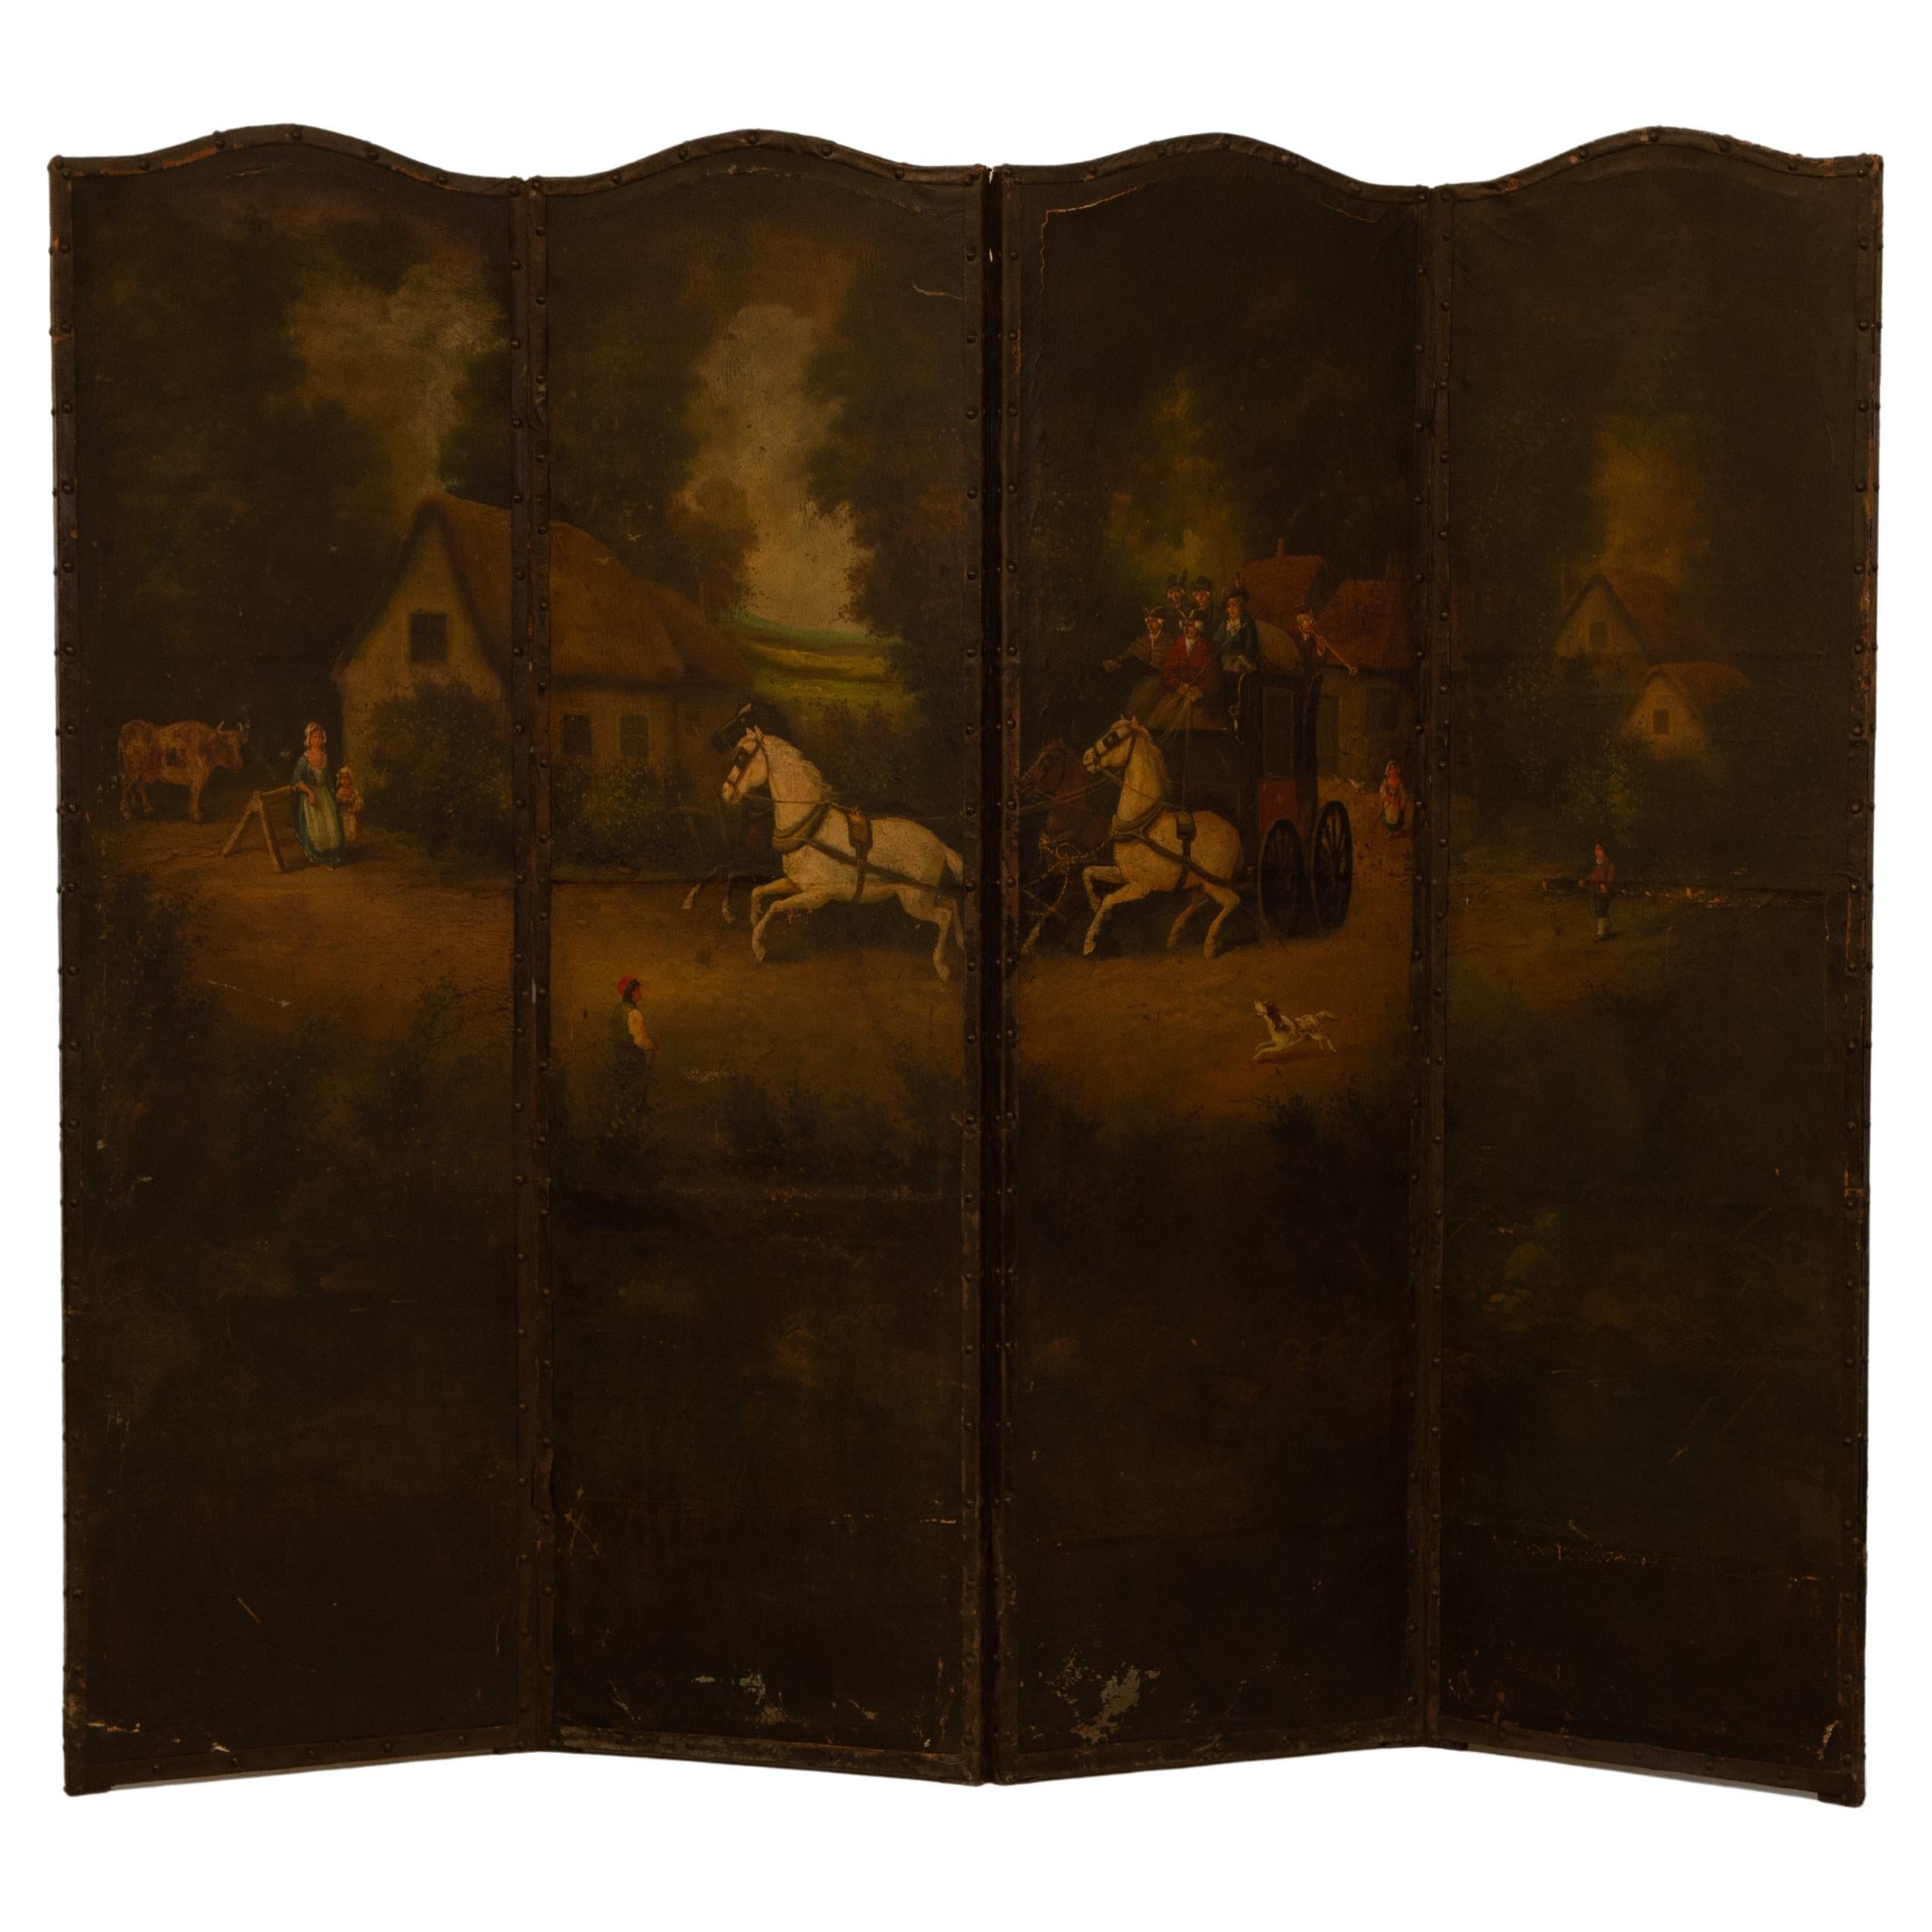 A wonderful decorative late 19th century four-panel folding screen/room divider. The four leather panels are hand-decorated in oils, depicting an early country scene with a horse drawn carriage passing through a village. Essentially a large oil